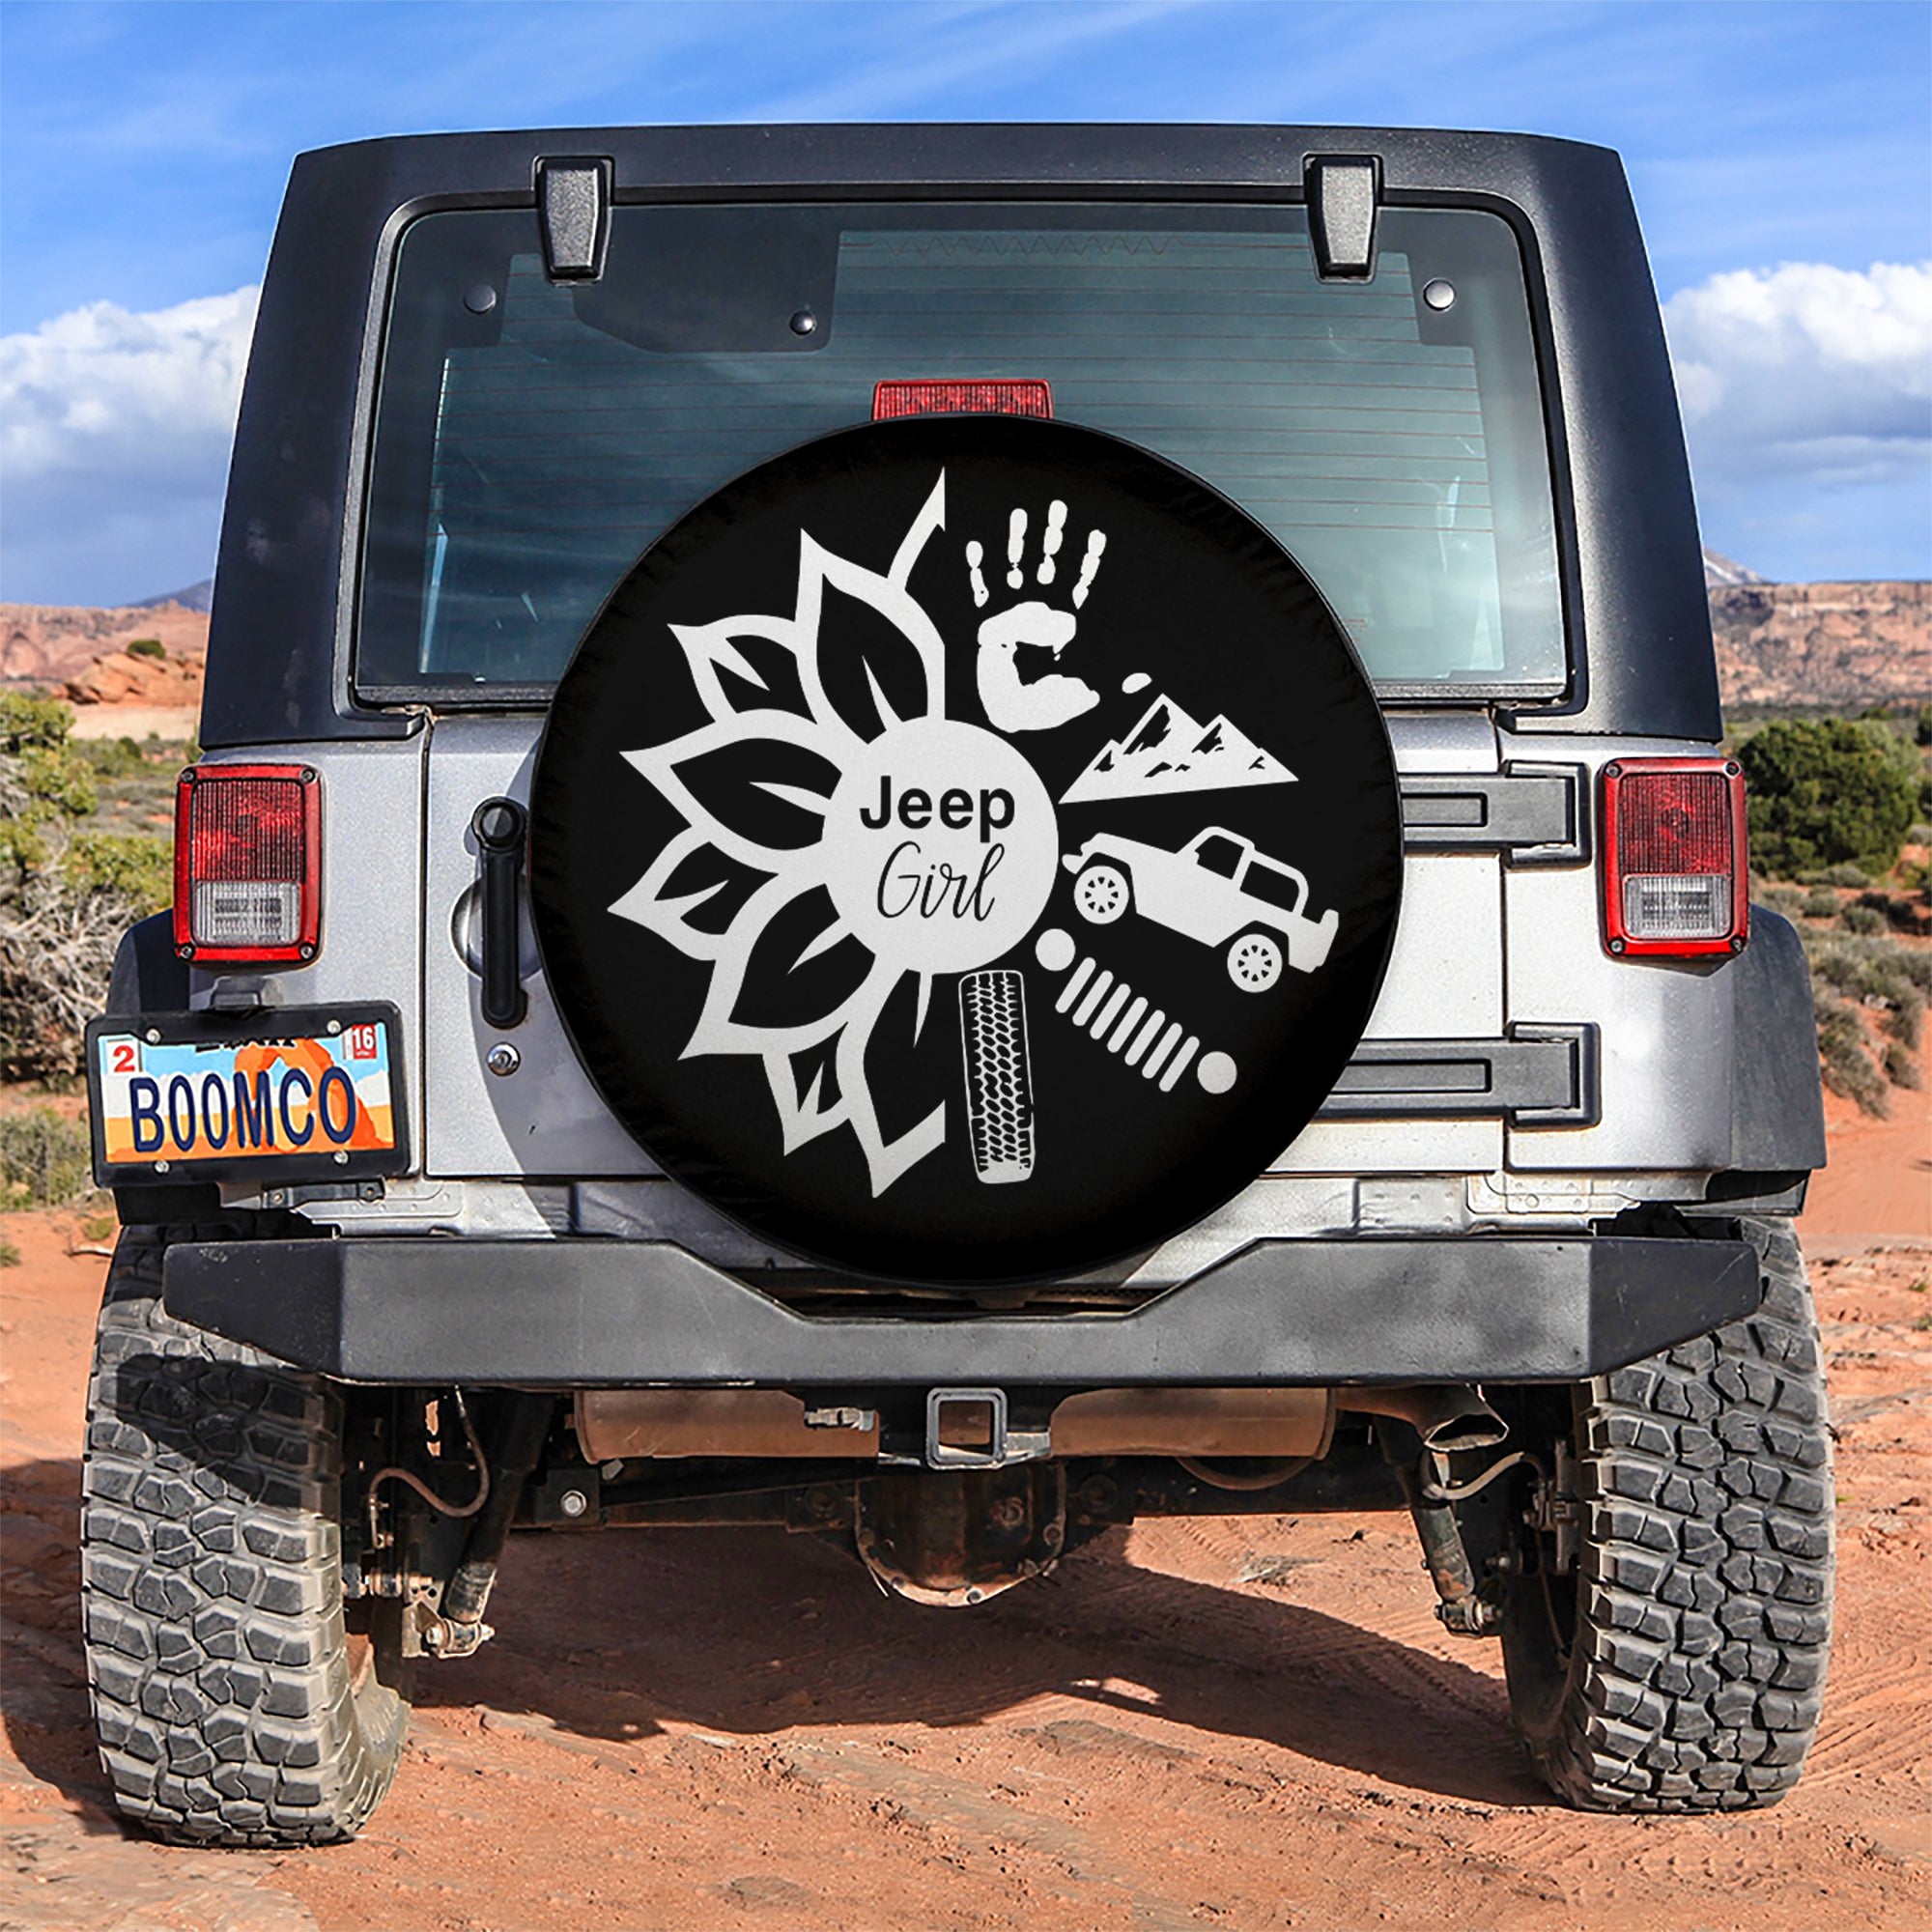 SunflowerJeep Girl Car Spare Tire Covers Gift For Campers Nearkii